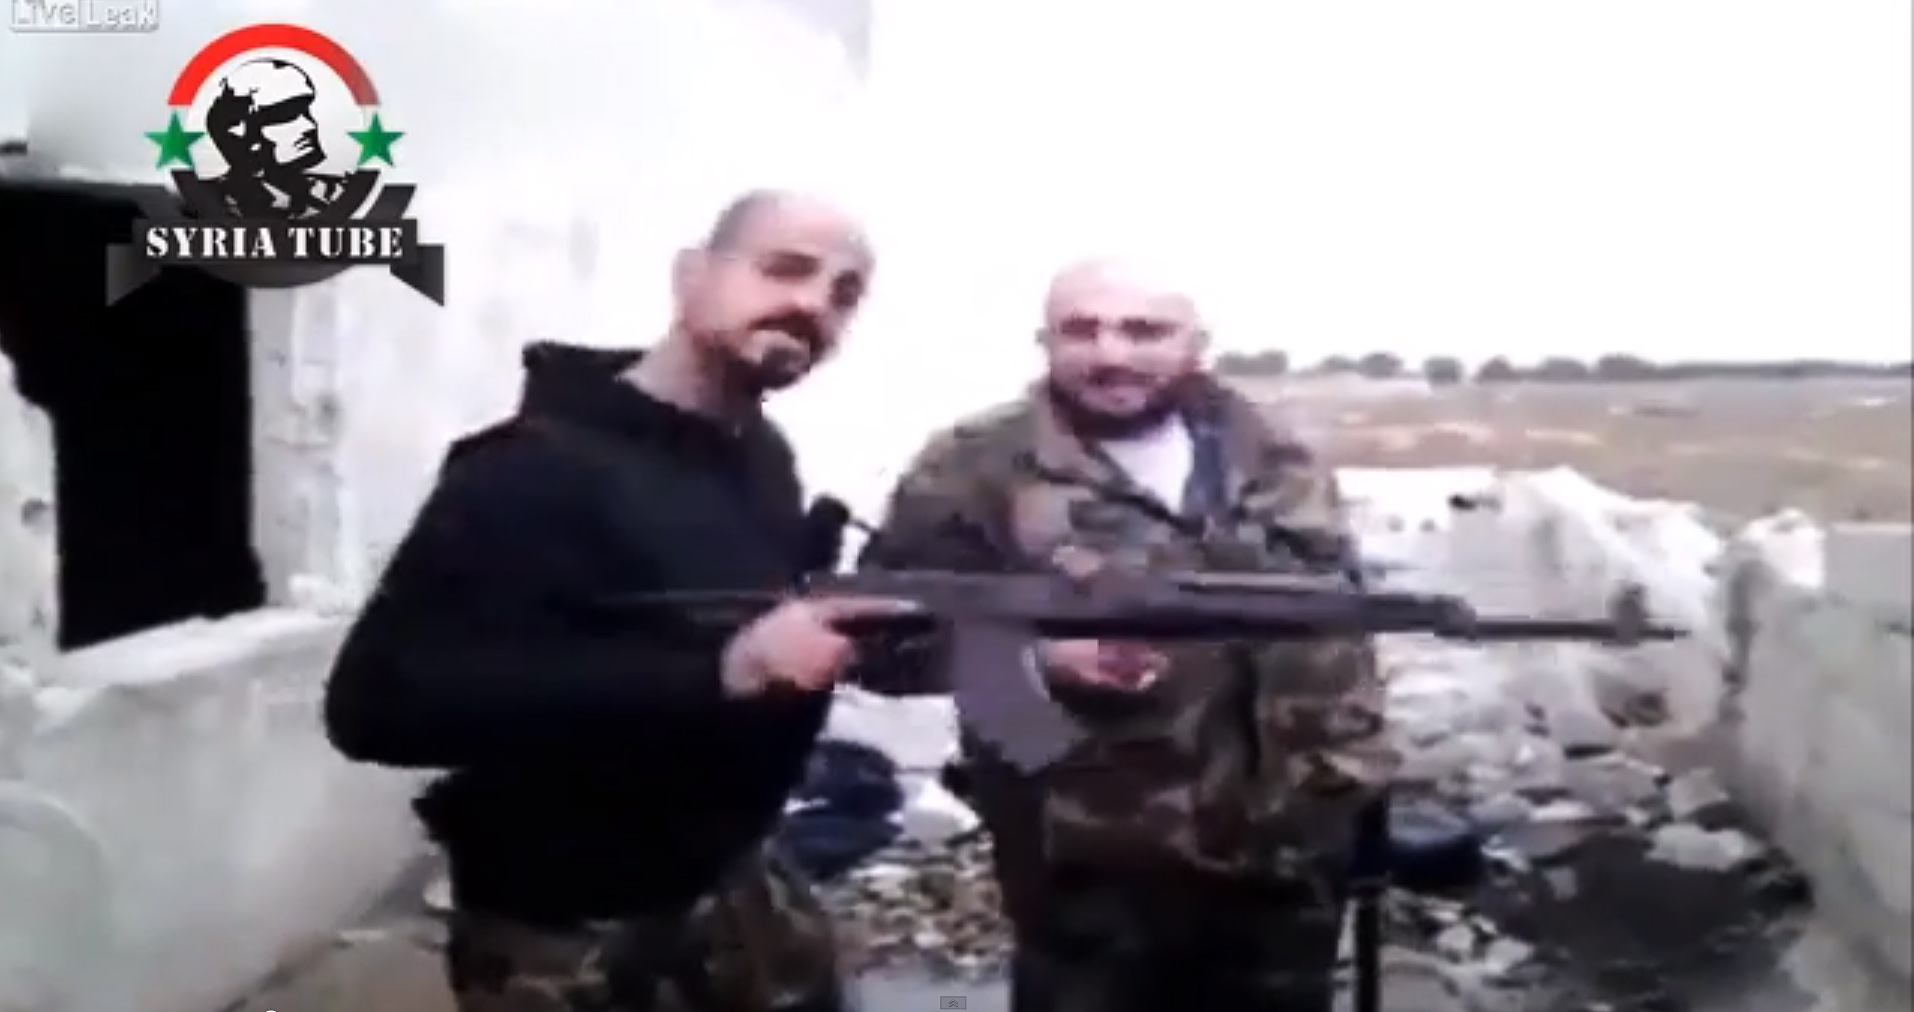 PHOTO: Two alleged members of a California-based gang claim to be in Syria fighting on support of embattled President Bashar al-Assad.